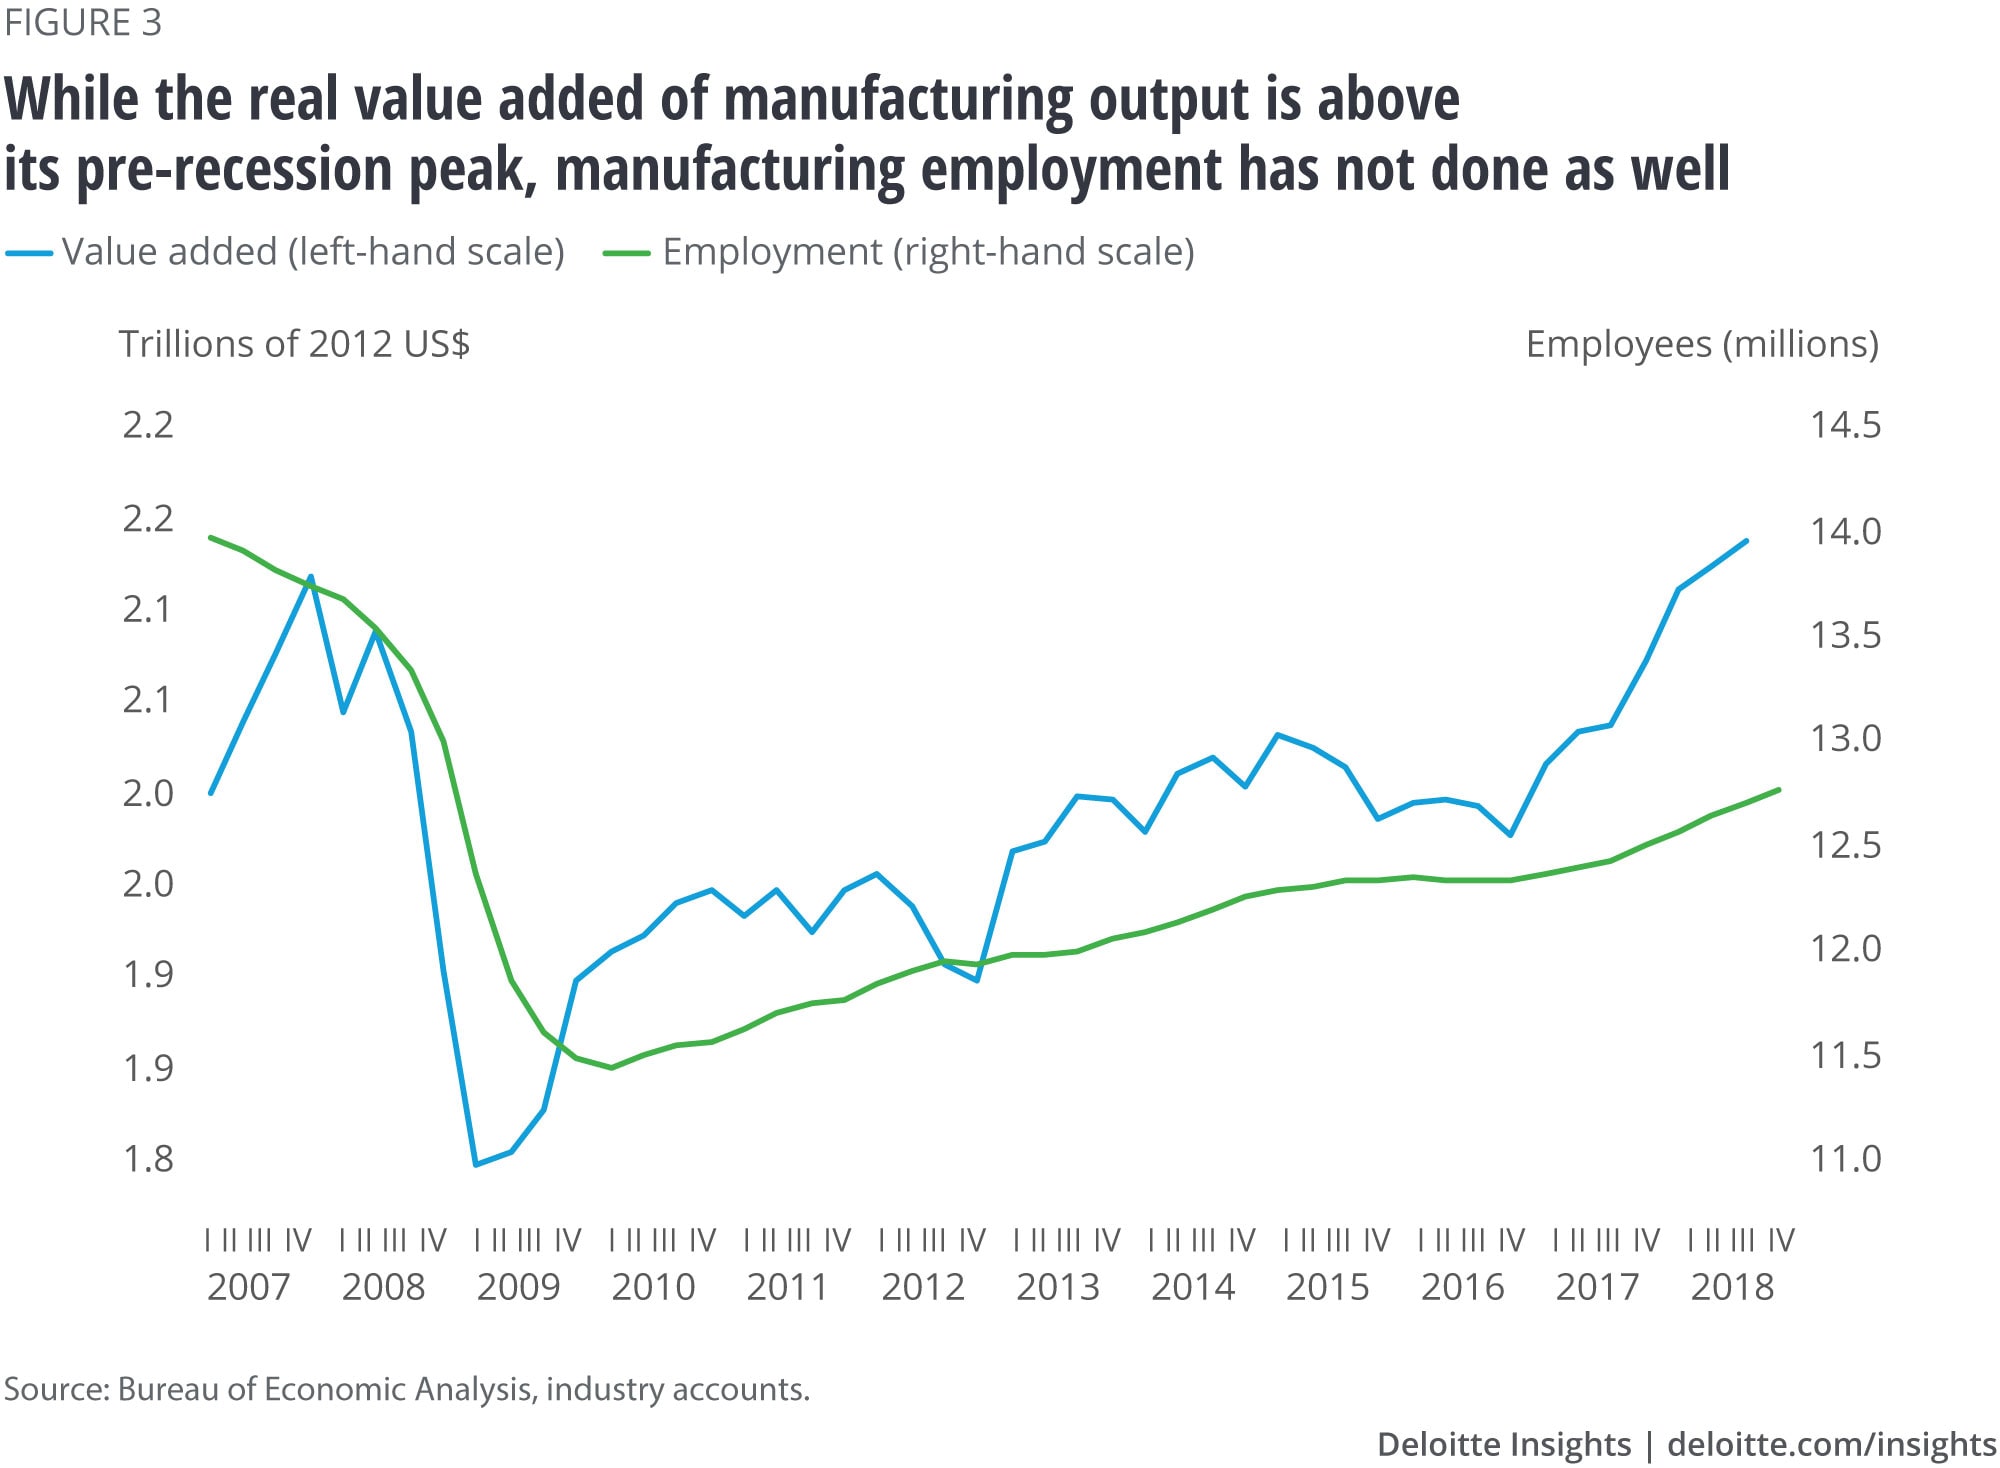 While the real value added for manufacturing output is above its pre-recession peak, manufacturing employment has not done as well